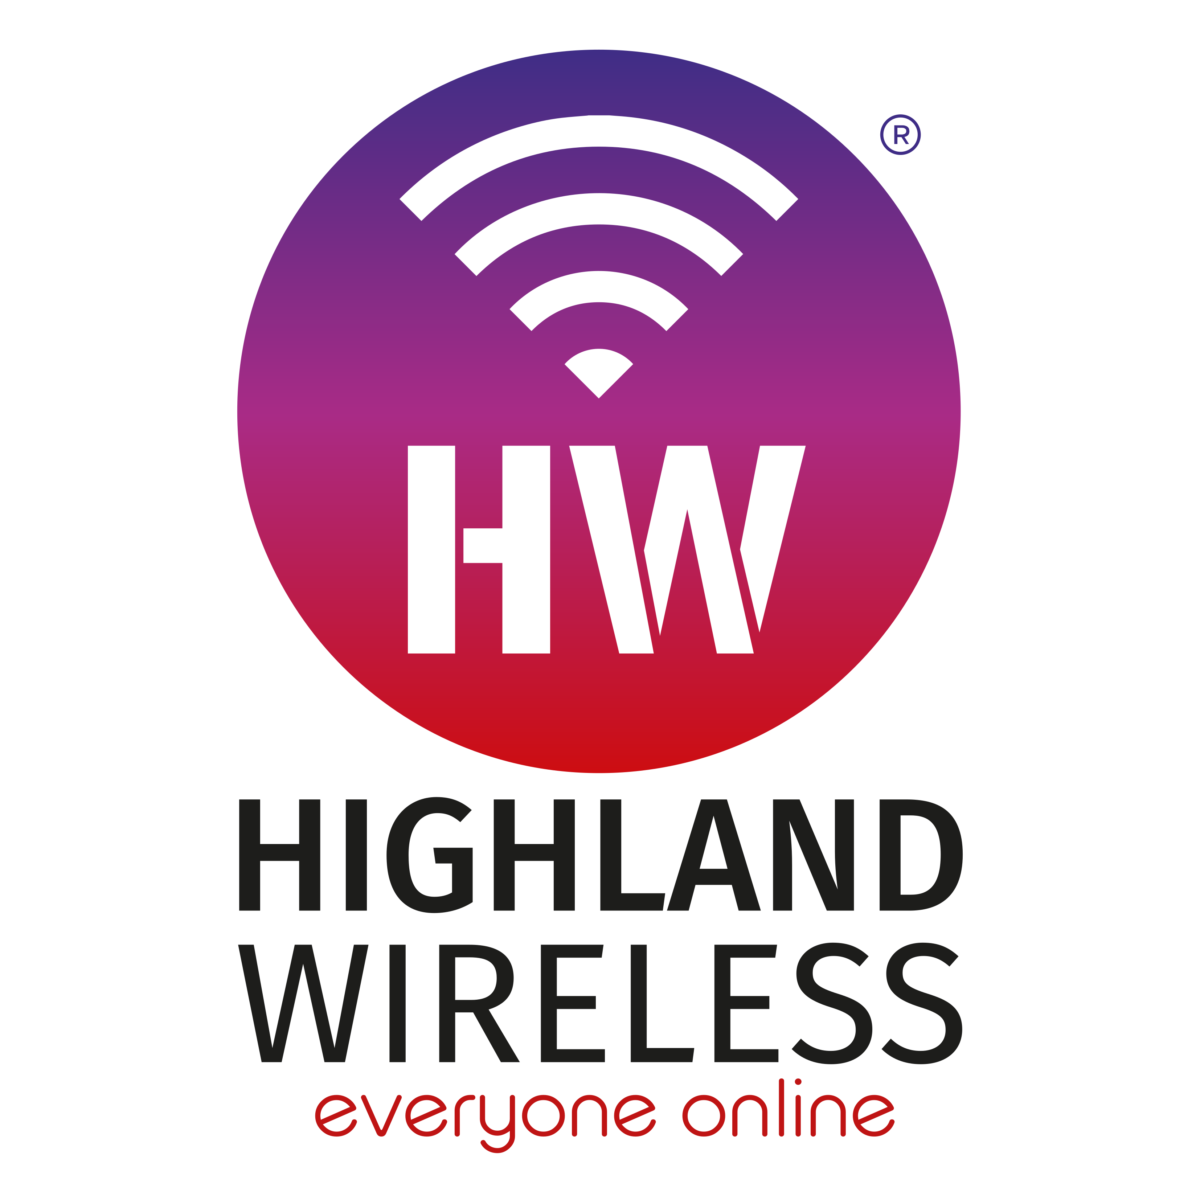 Highland Wireless partnering with LogieNet to provide better broadband to the local rural area